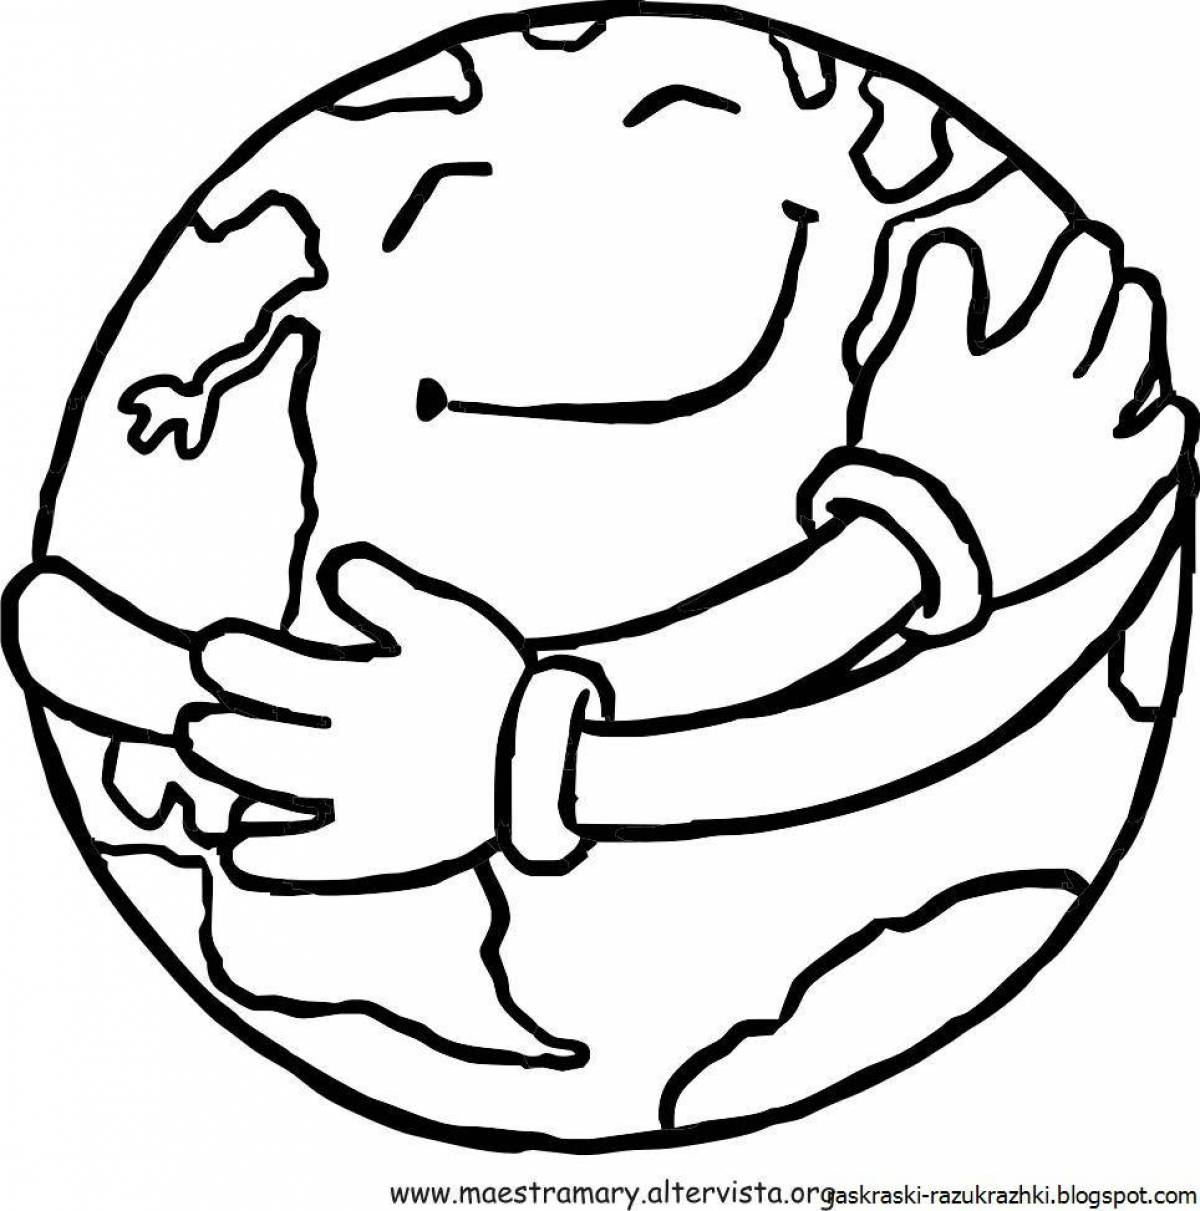 Playful planet earth coloring page for kids